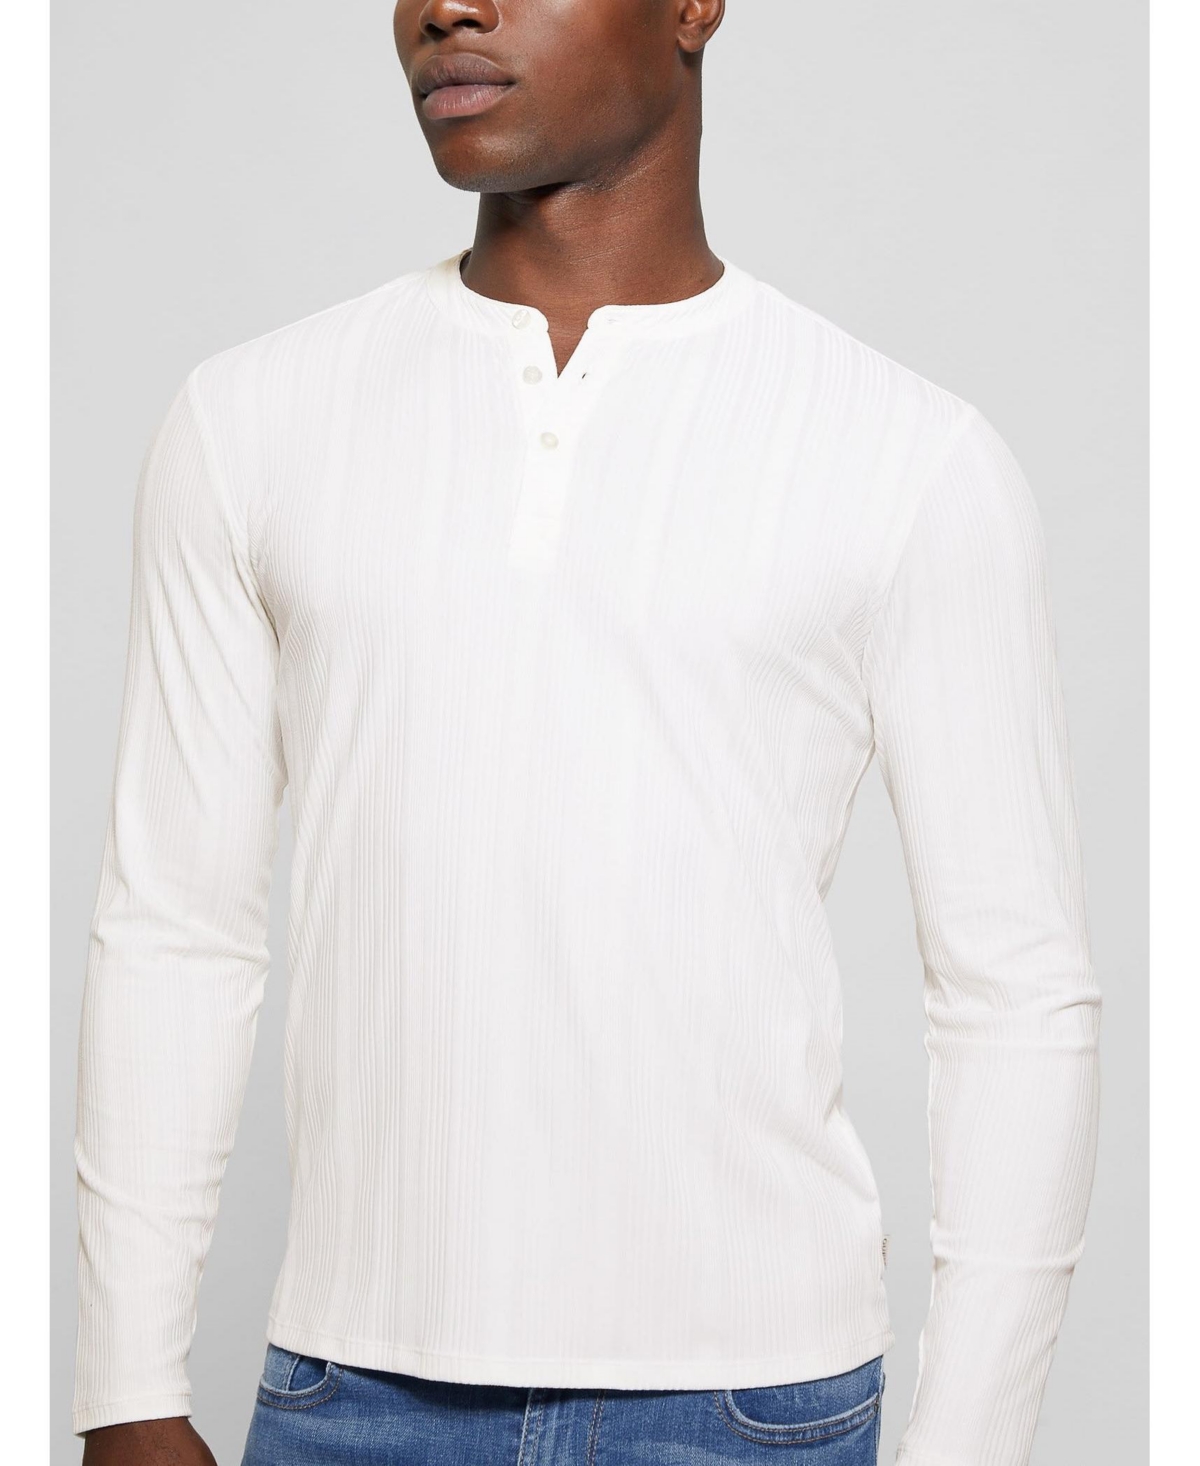 Guess Men's Brentwood Rib Knit Henley T-shirt In White